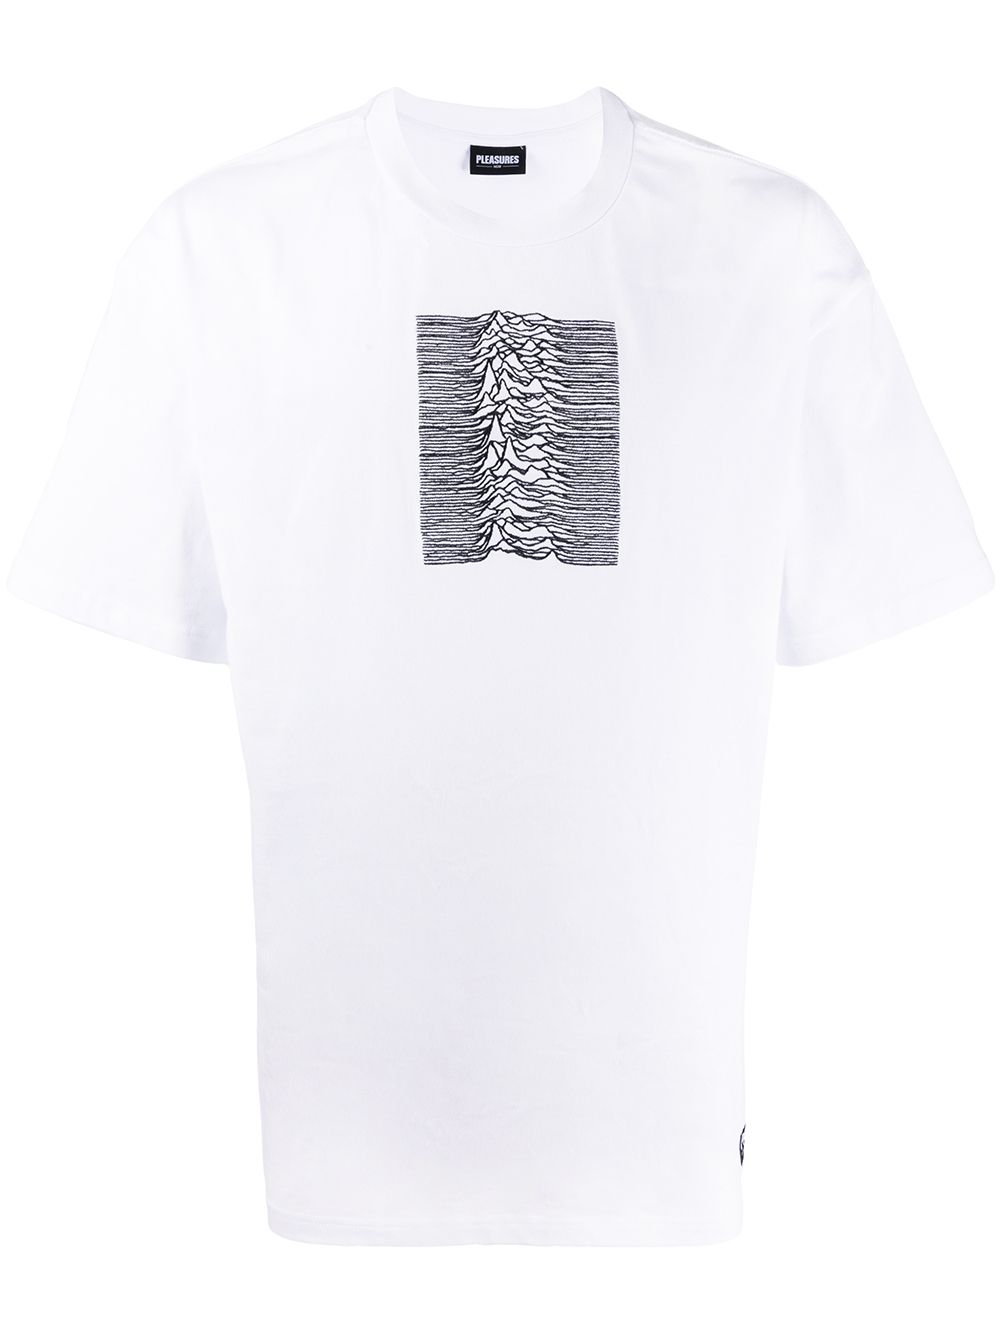 Pleasures Graphic Print T-shirt In White